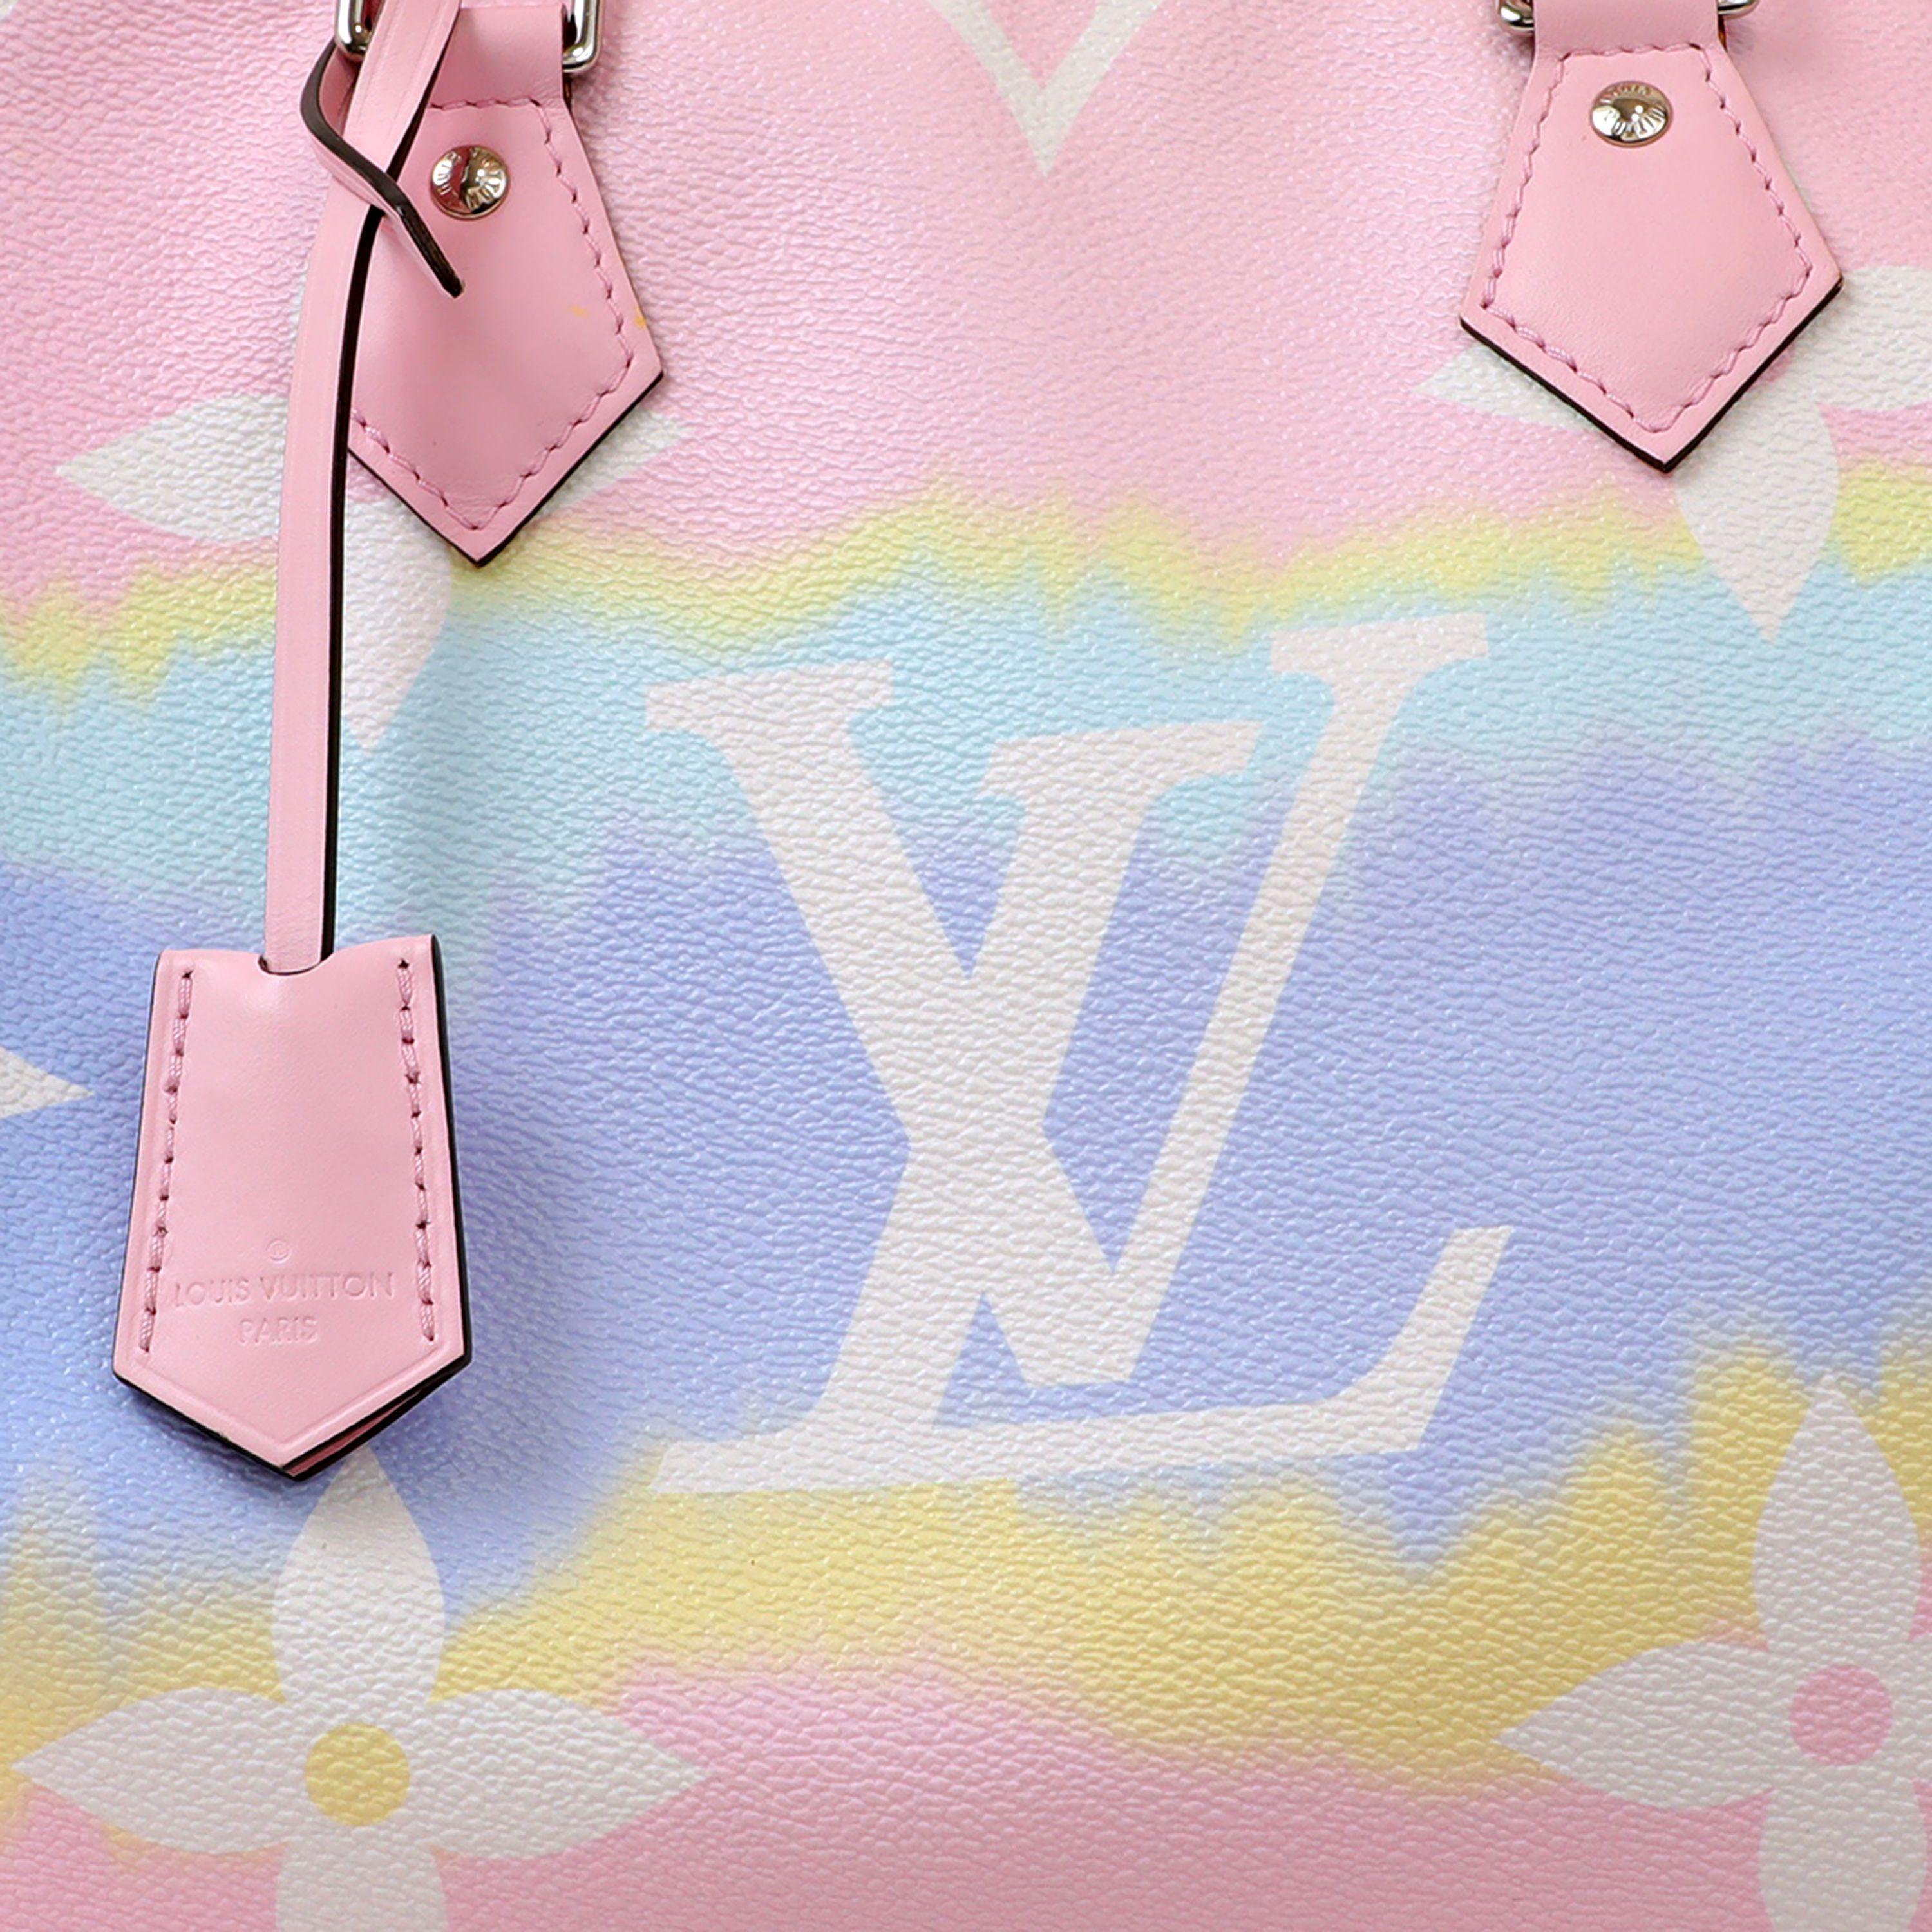 Louis Vuitton Pink Escale 30 Speedy Bandouliere Crossbody- Pristine condition.  Pastel colors, oversized LV monogram pattern.  Detachable and adjustable shoulder strap. Coordinating Kirigami pouch available in separate listing. Dust bag